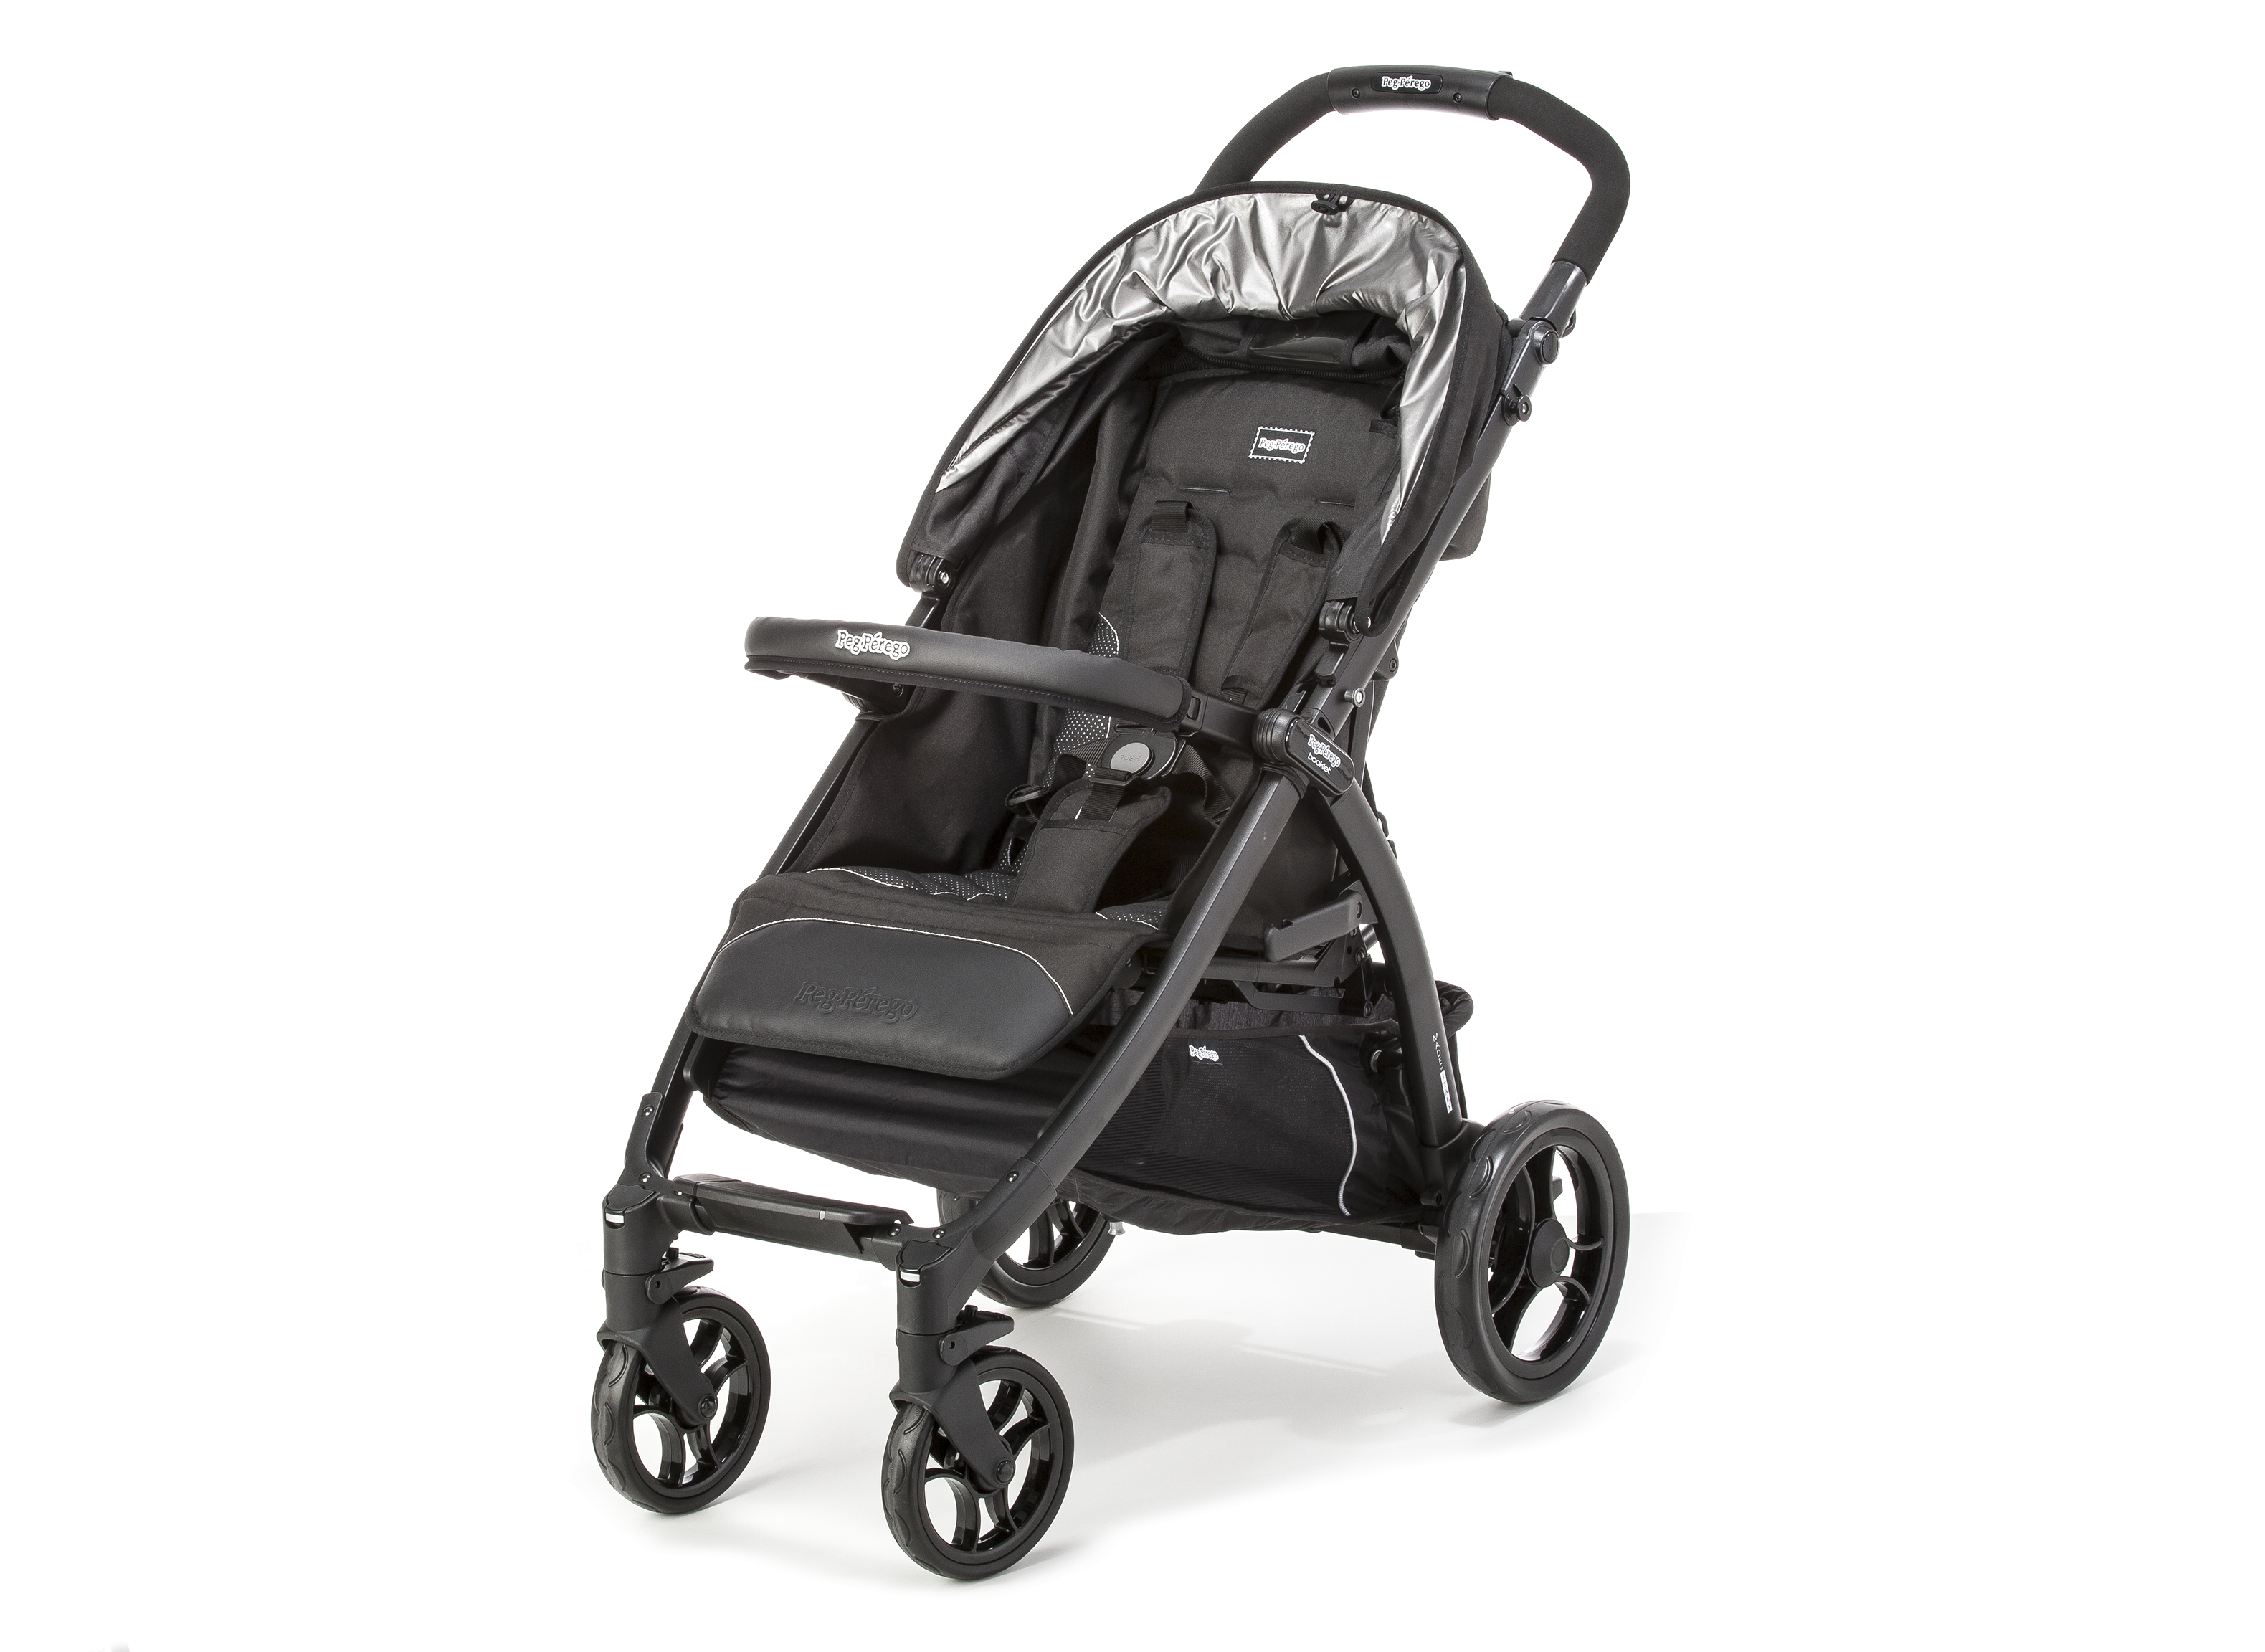 Peg Perego Booklet Stroller Review - Consumer Reports